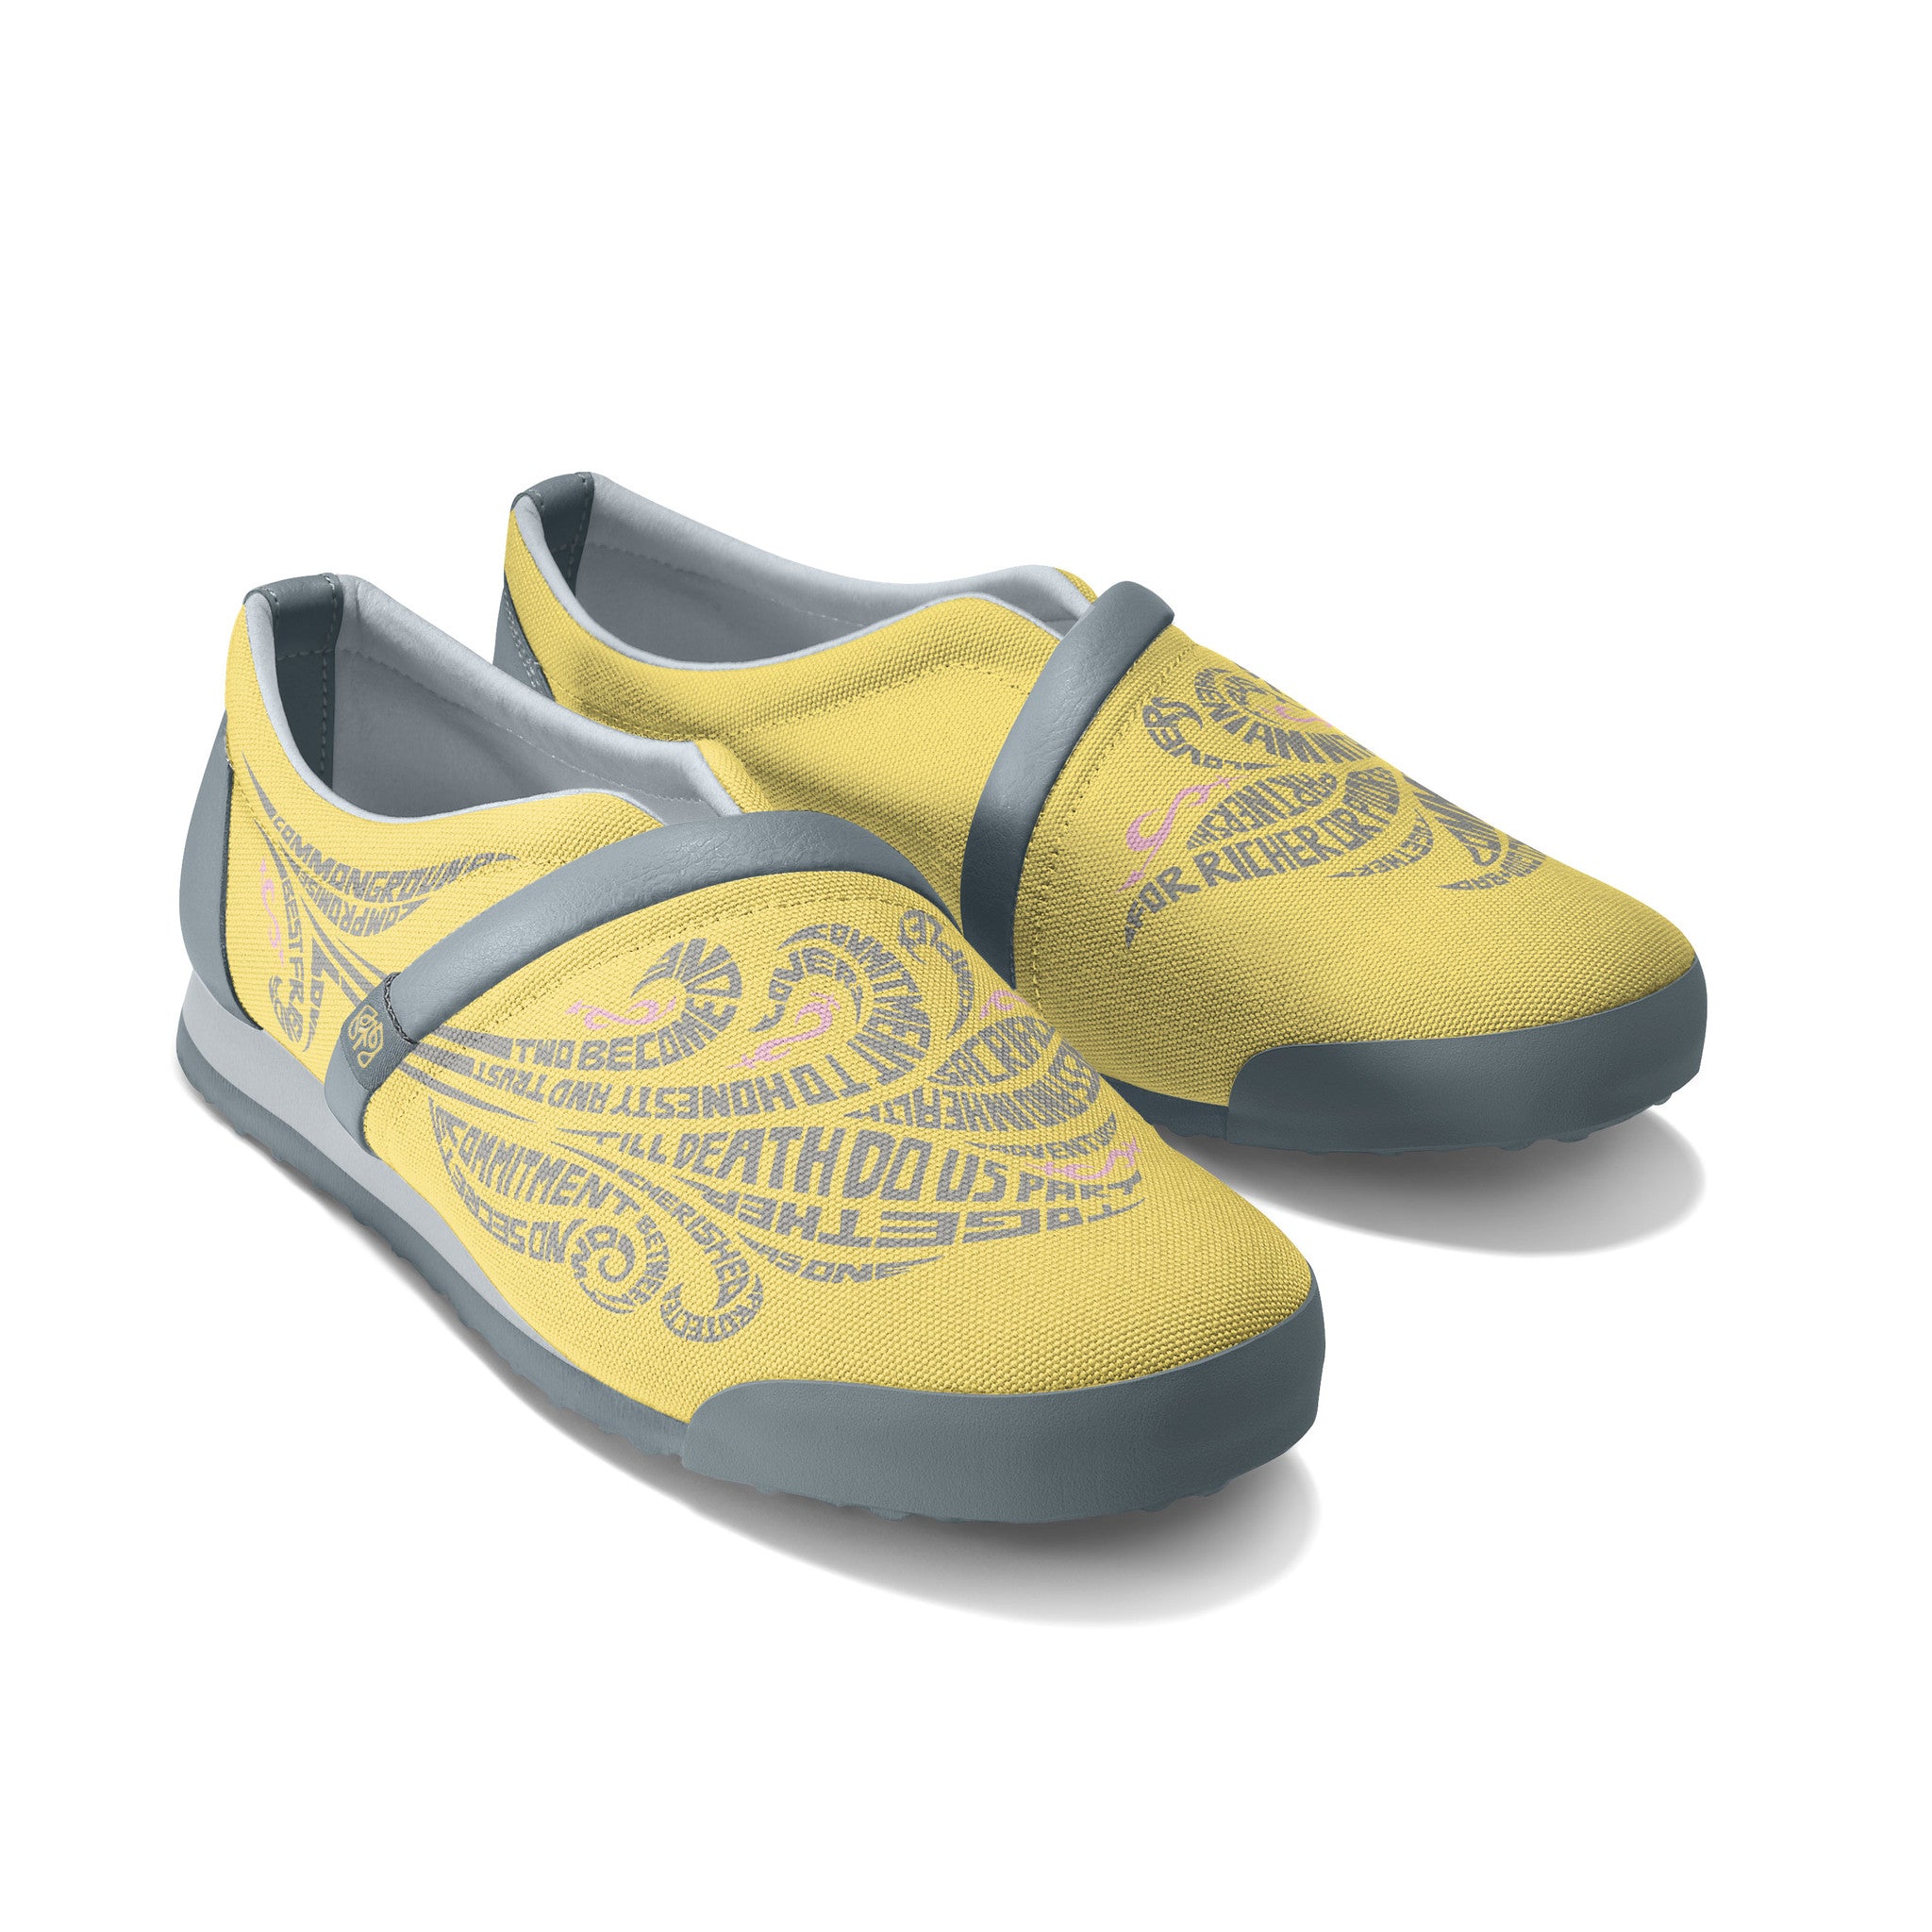 Goldfinch - Common Ground Footwear Shoes Right Perspective View